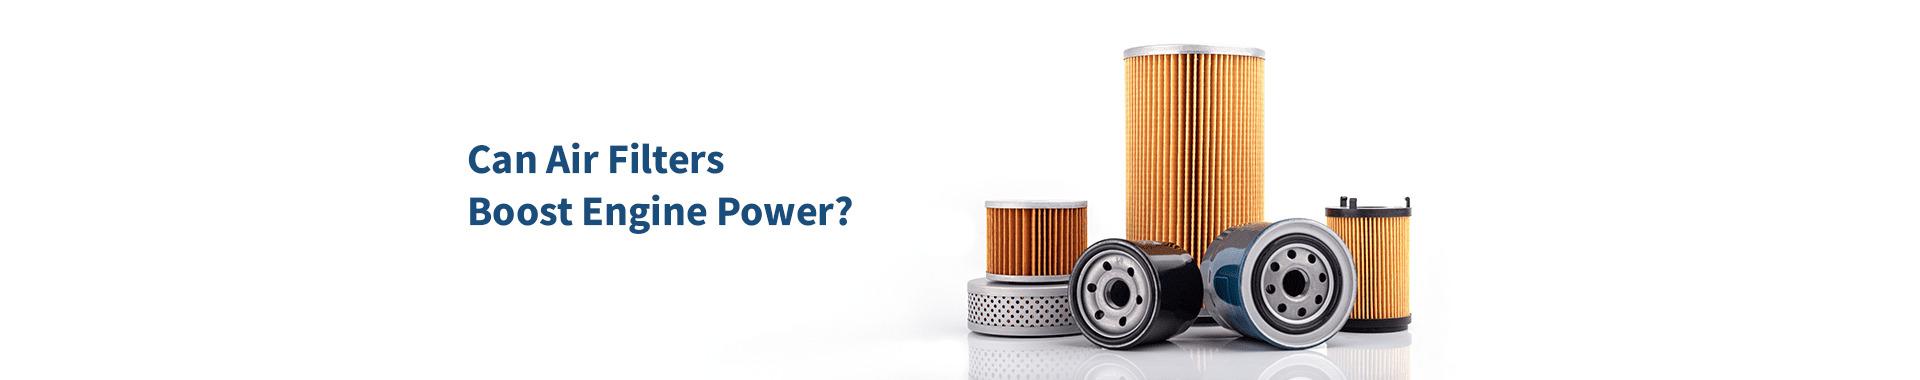 Can Air Filters Increase Engine Power?